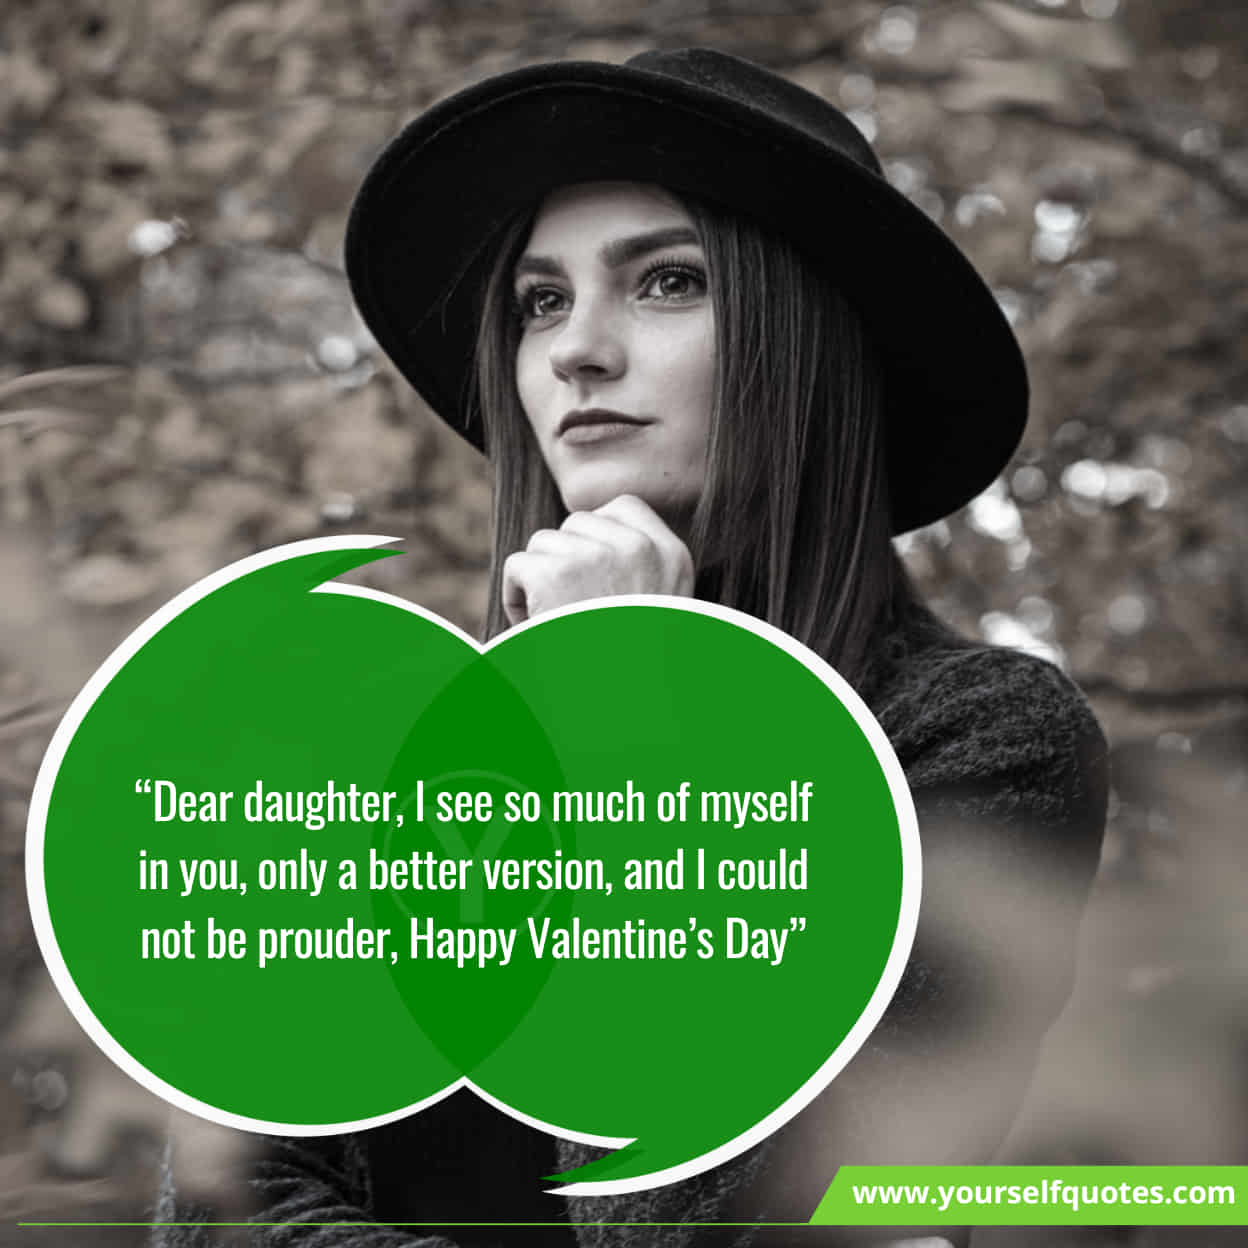 Heart-Warming Wishes For Daughter On Valentine's Day